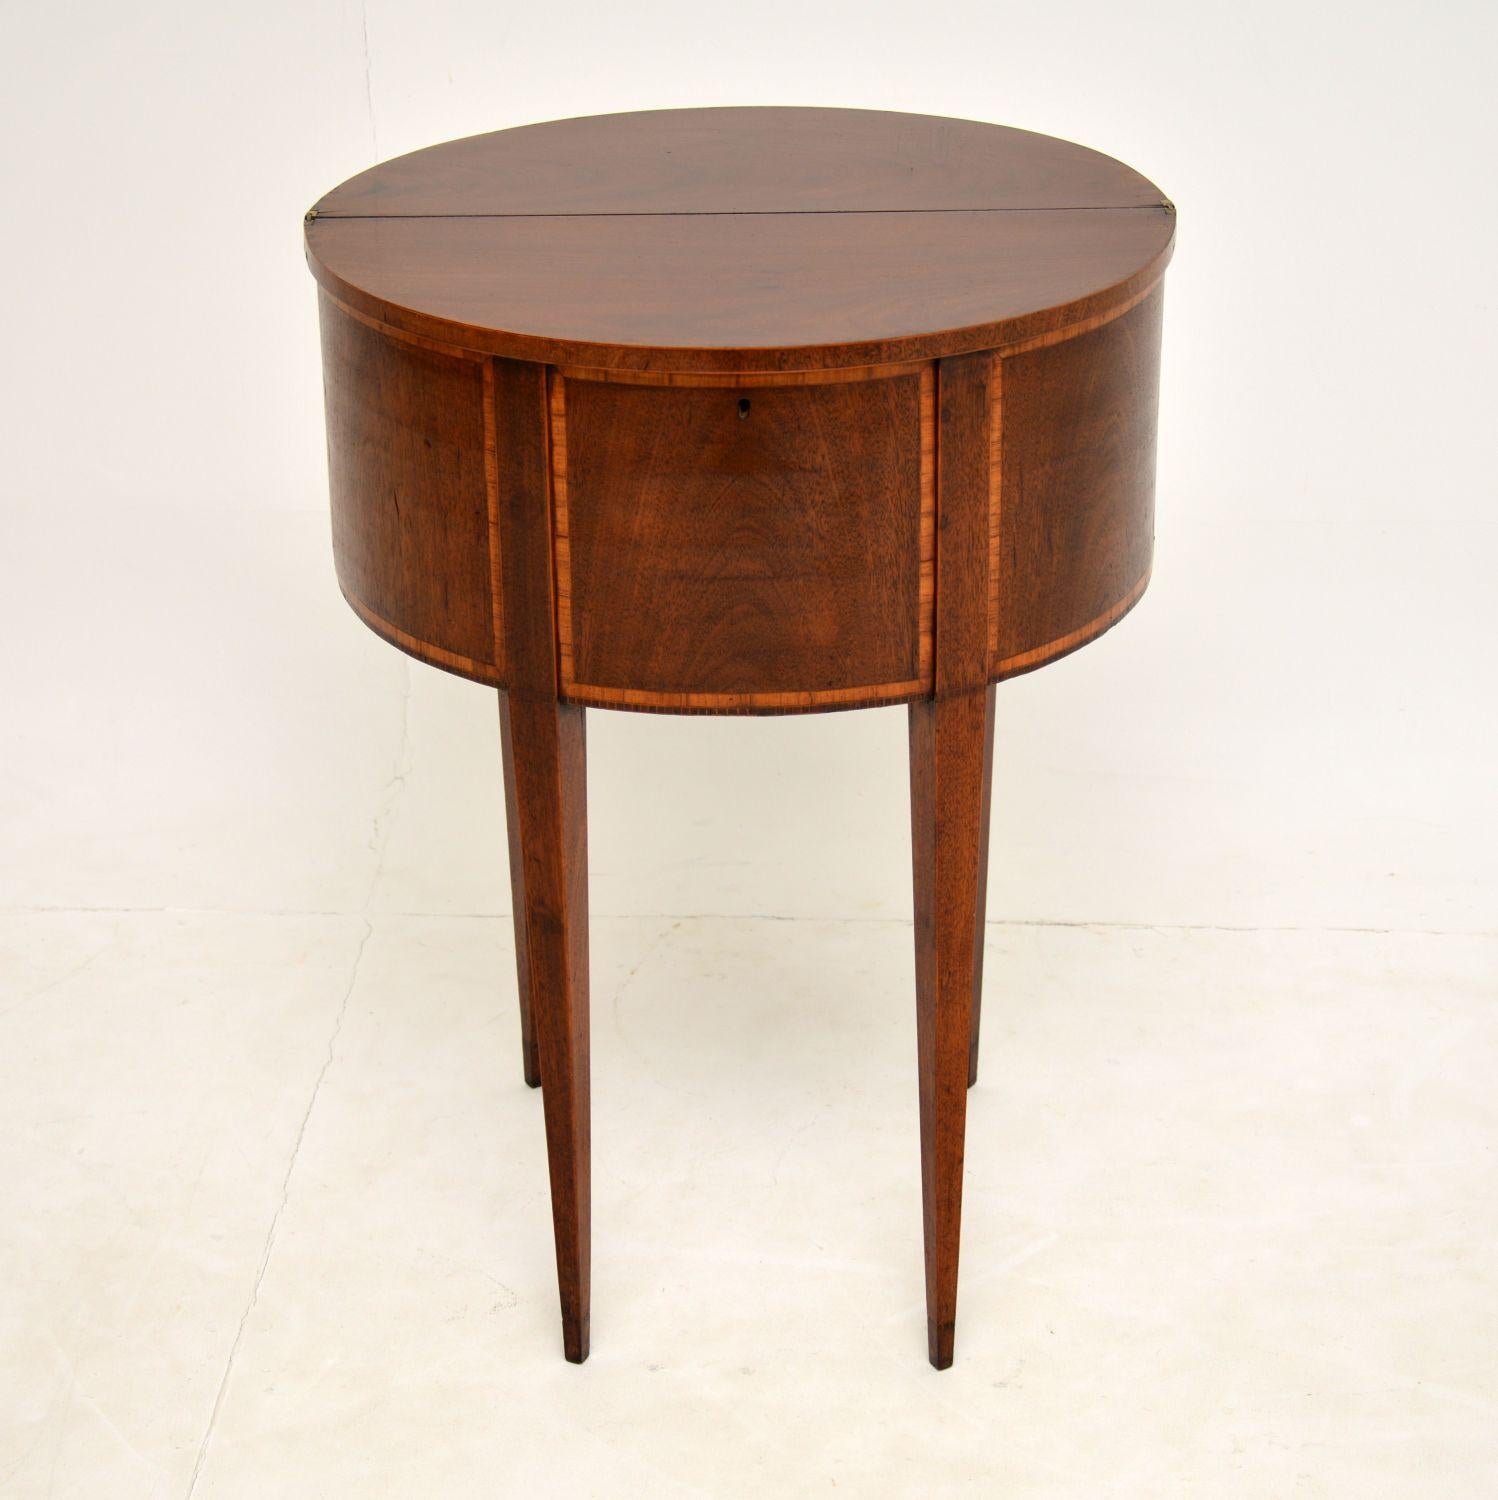 A lovely and extremely unusual antique side table made from satin wood inlay. This is in the Sheraton style, we are not quite sure if it is Edwardian (c.1900) or Georgian Period (c.1800). It is hard to tell as it is quite a unique piece, that has